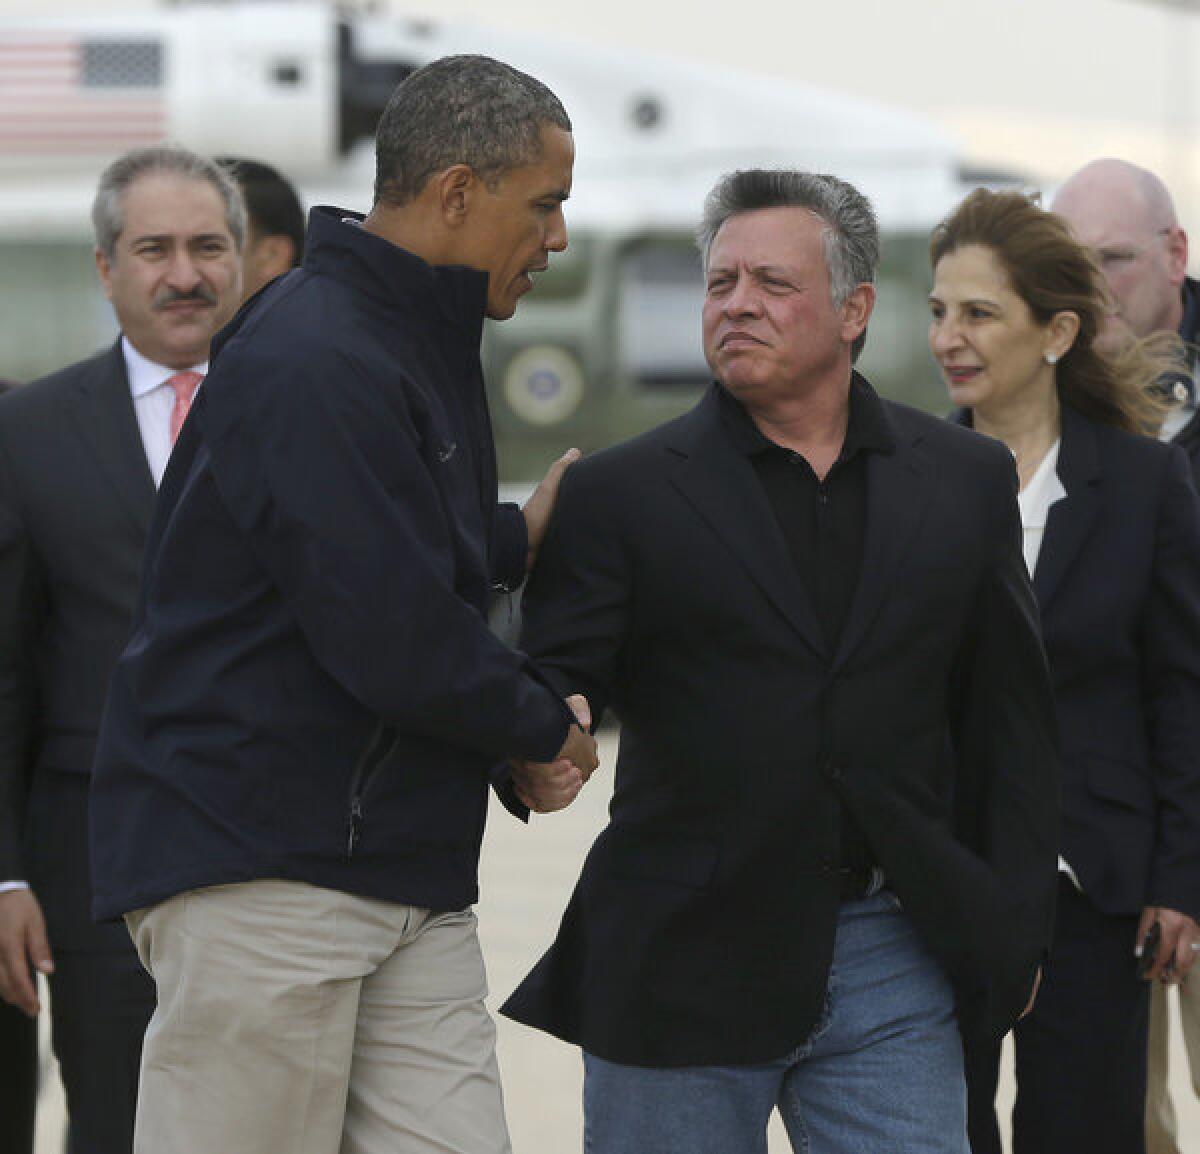 President Obama talks with King Abdullah II as he concludes a visit to Jordan. Abdullah faces criticism at home for comments he made in an interview with the Atlantic magazine.